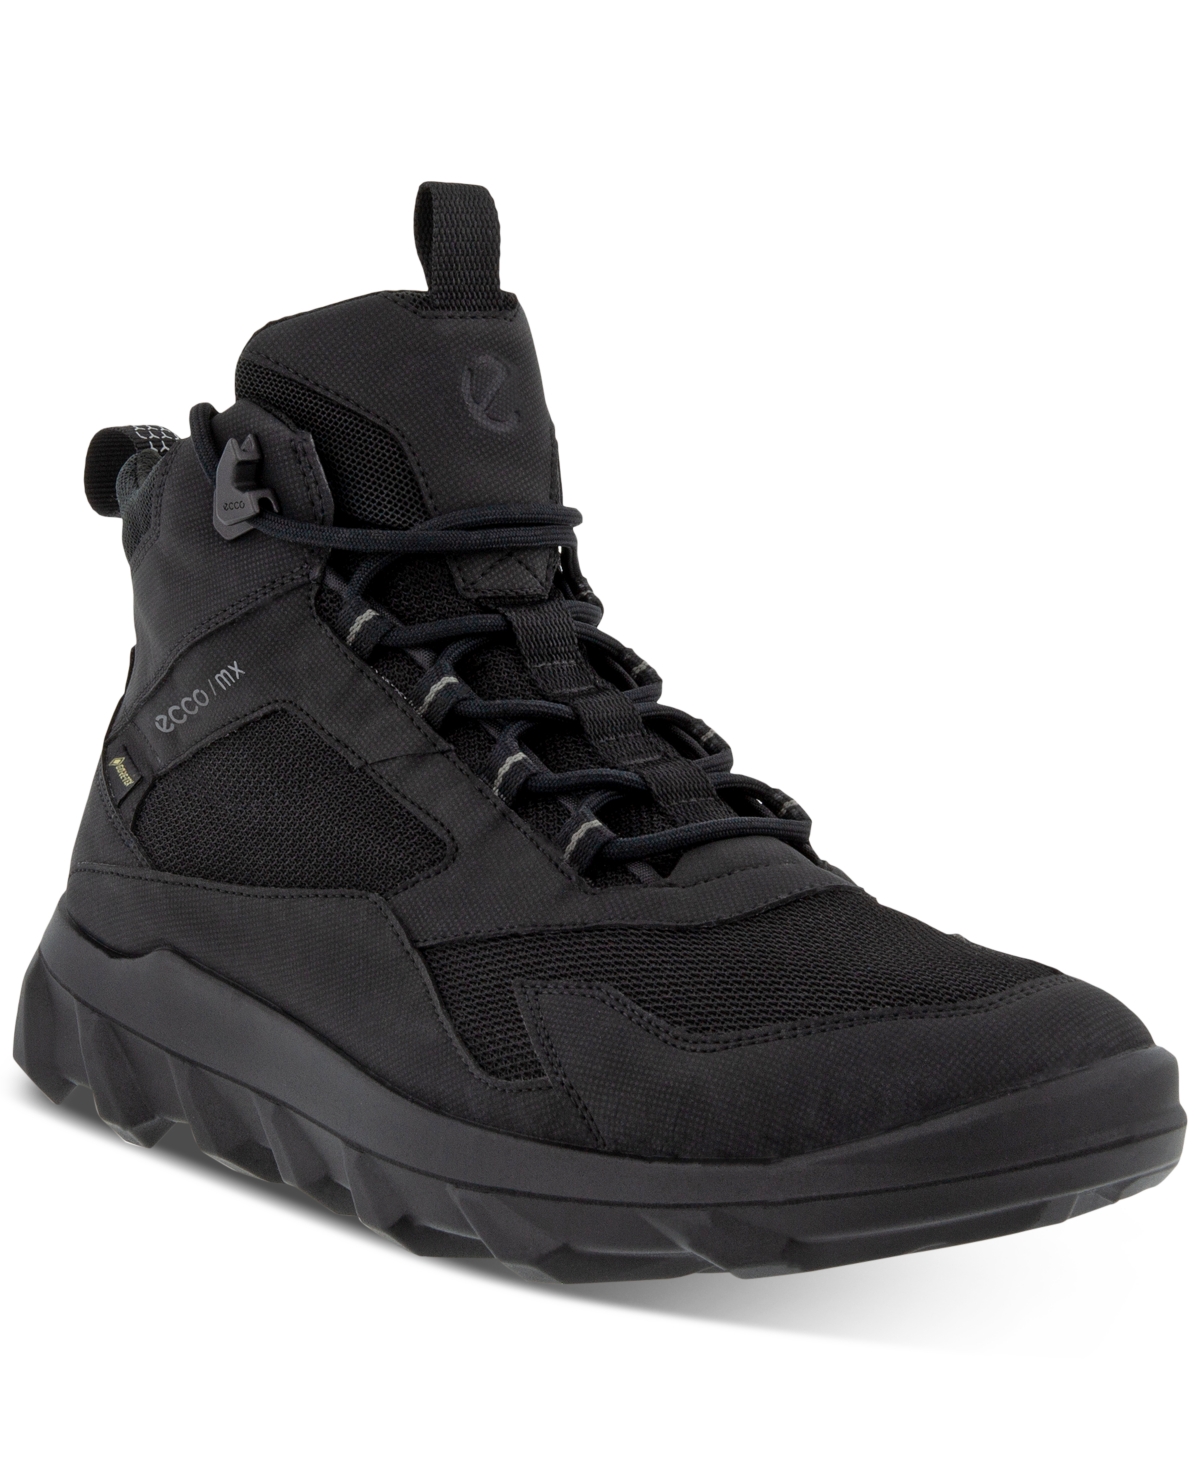 UPC 194890197480 product image for Ecco Men's Mx Mid Waterproof Lace-Up Hiking Boots Men's Shoes | upcitemdb.com